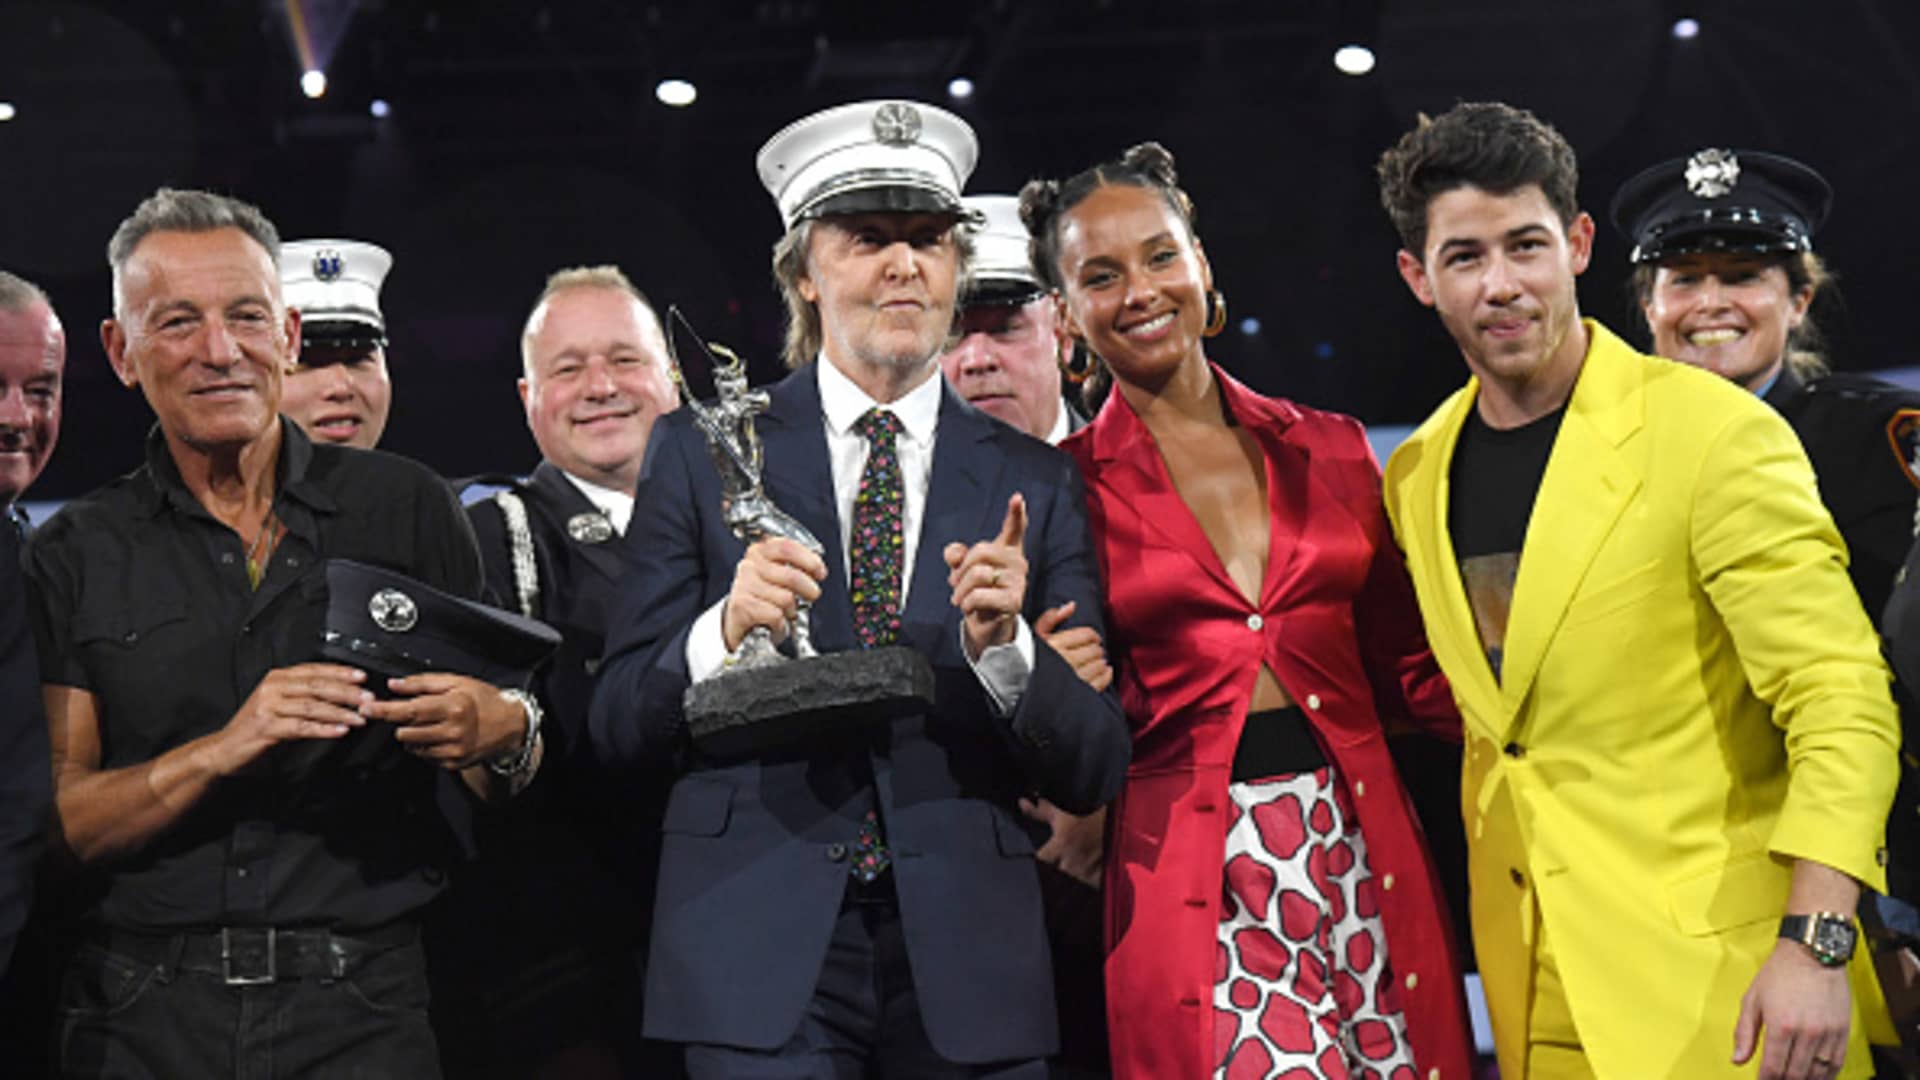 Bruce Springsteen, Paul McCartney, Alicia Keys and Nick Jonas pose onstage during the Robin Hood Benefit at Jacob Javits Center on October 20, 2021 in New York City.